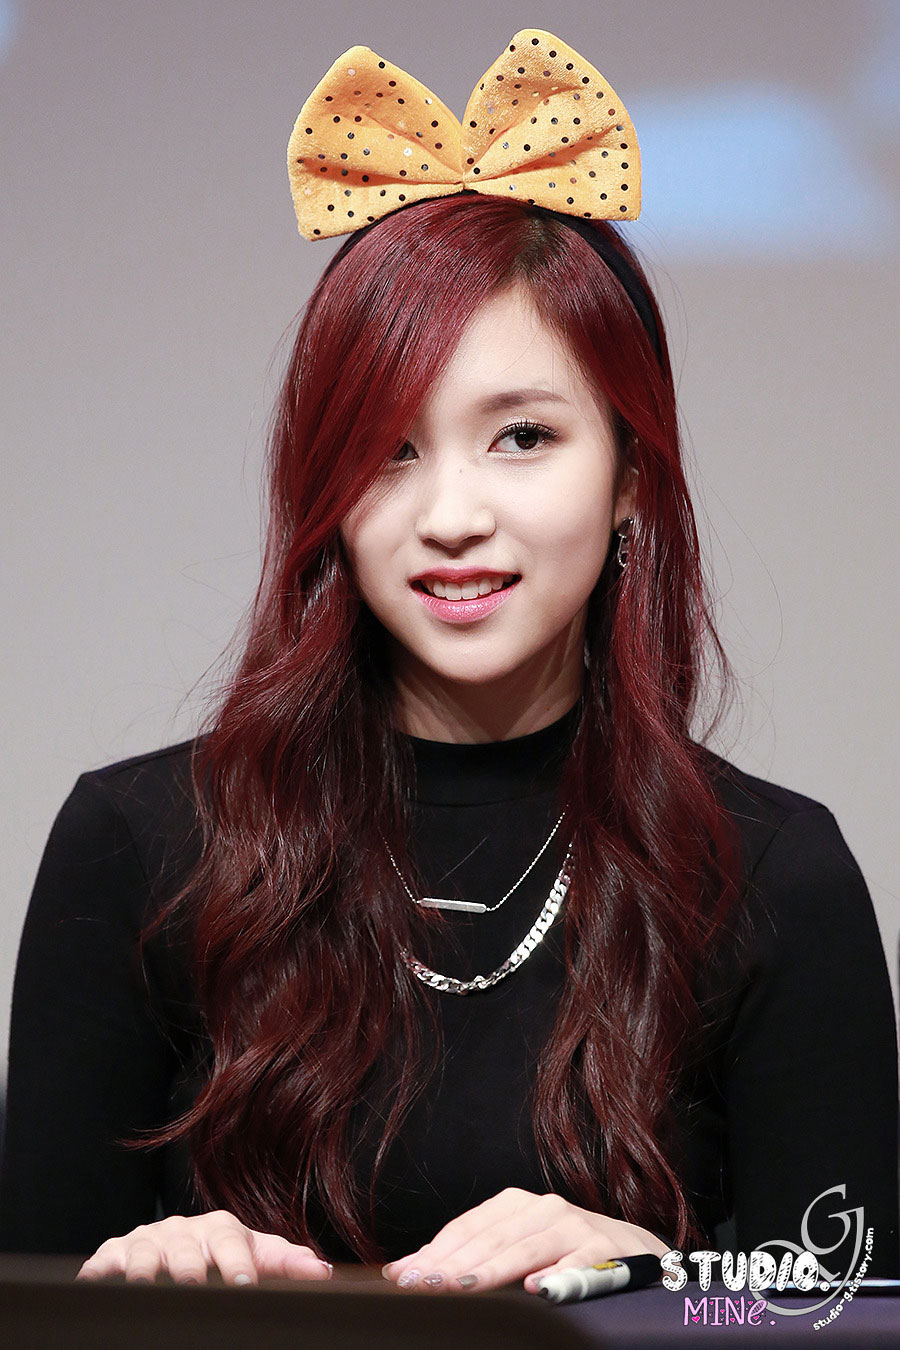 Twice Mina Ooh Ahh fan signing event